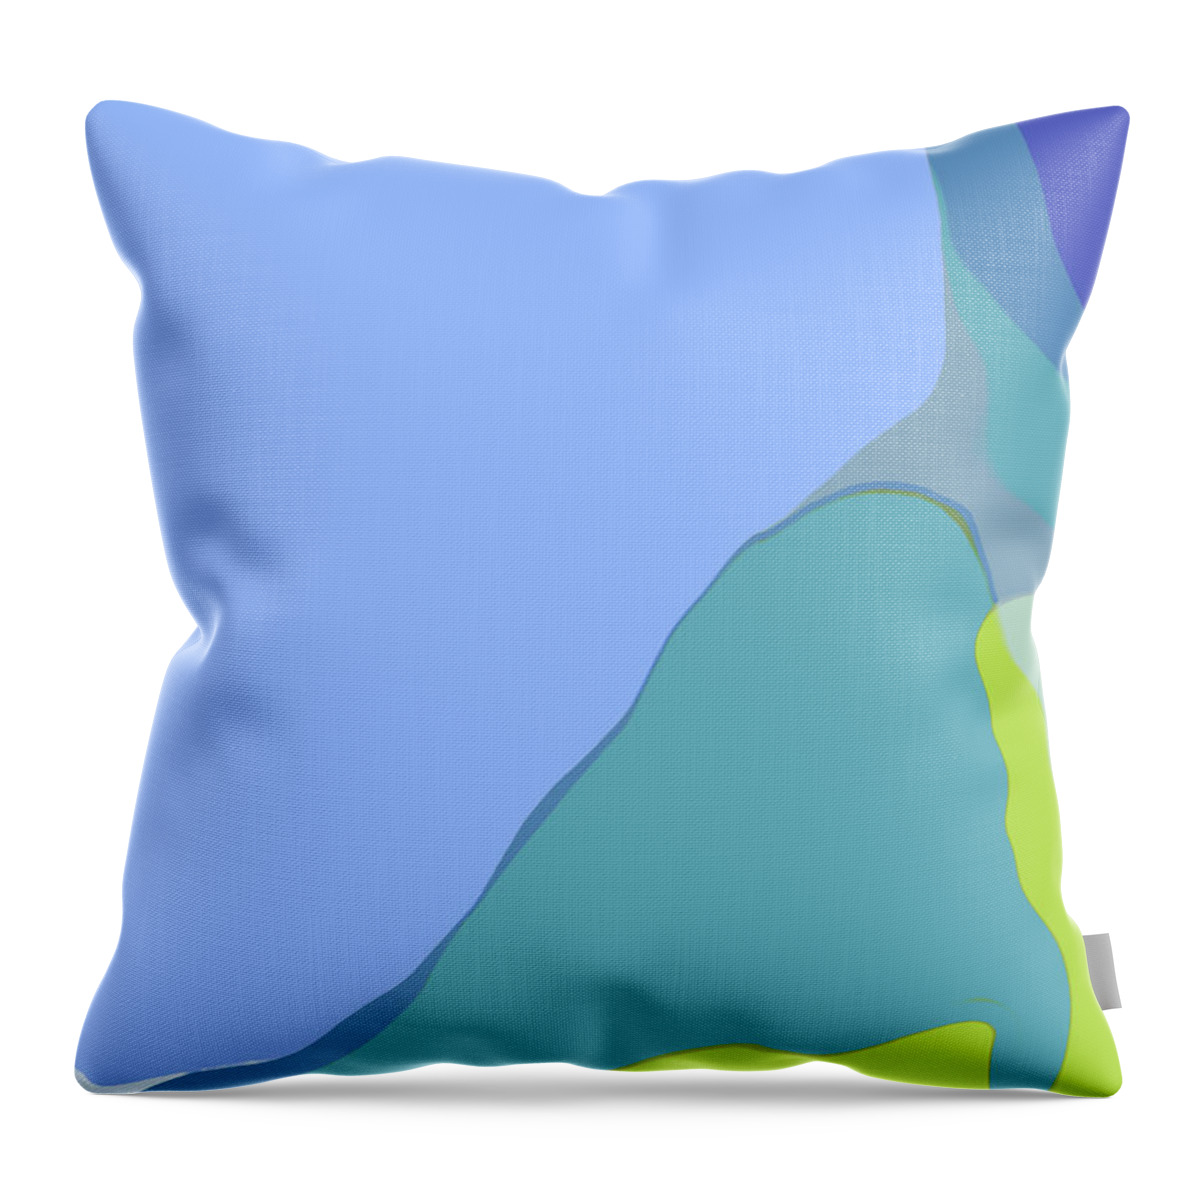 Abstract Throw Pillow featuring the digital art Blue Skies by Gina Harrison